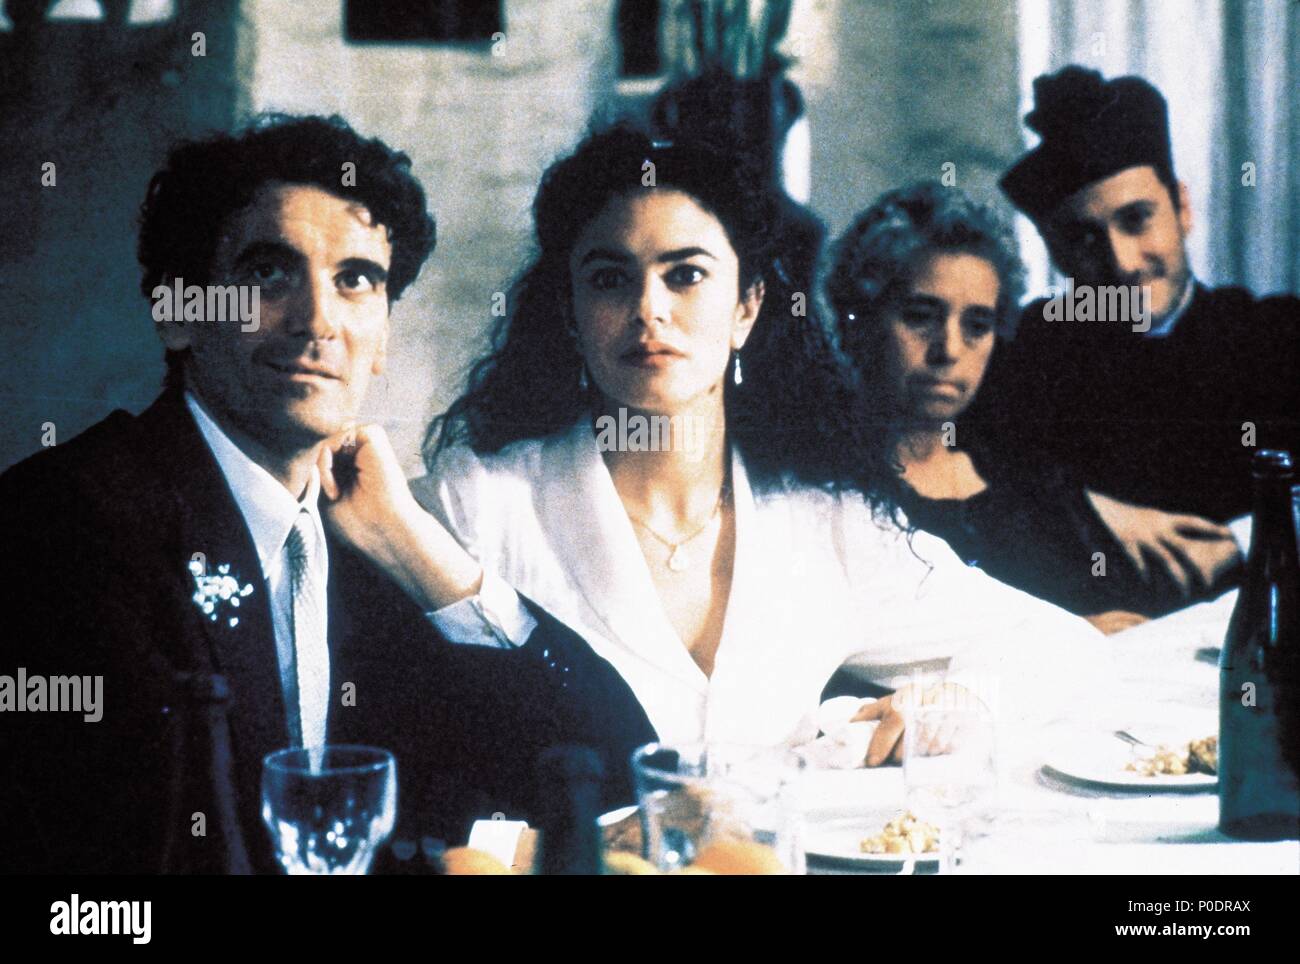 Original Film Title: IL POSTINO.  English Title: POSTMAN, THE.  Film Director: MICHAEL RADFORD.  Year: 1994.  Stars: MASSIMO TROISI; MARIA GRAZIA CUCINOTTA. Copyright: Editorial inside use only. This is a publicly distributed handout. Access rights only, no license of copyright provided. Mandatory authorization to Visual Icon (www.visual-icon.com) is required for the reproduction of this image. Credit: BUENA VISTA / Album Stock Photo